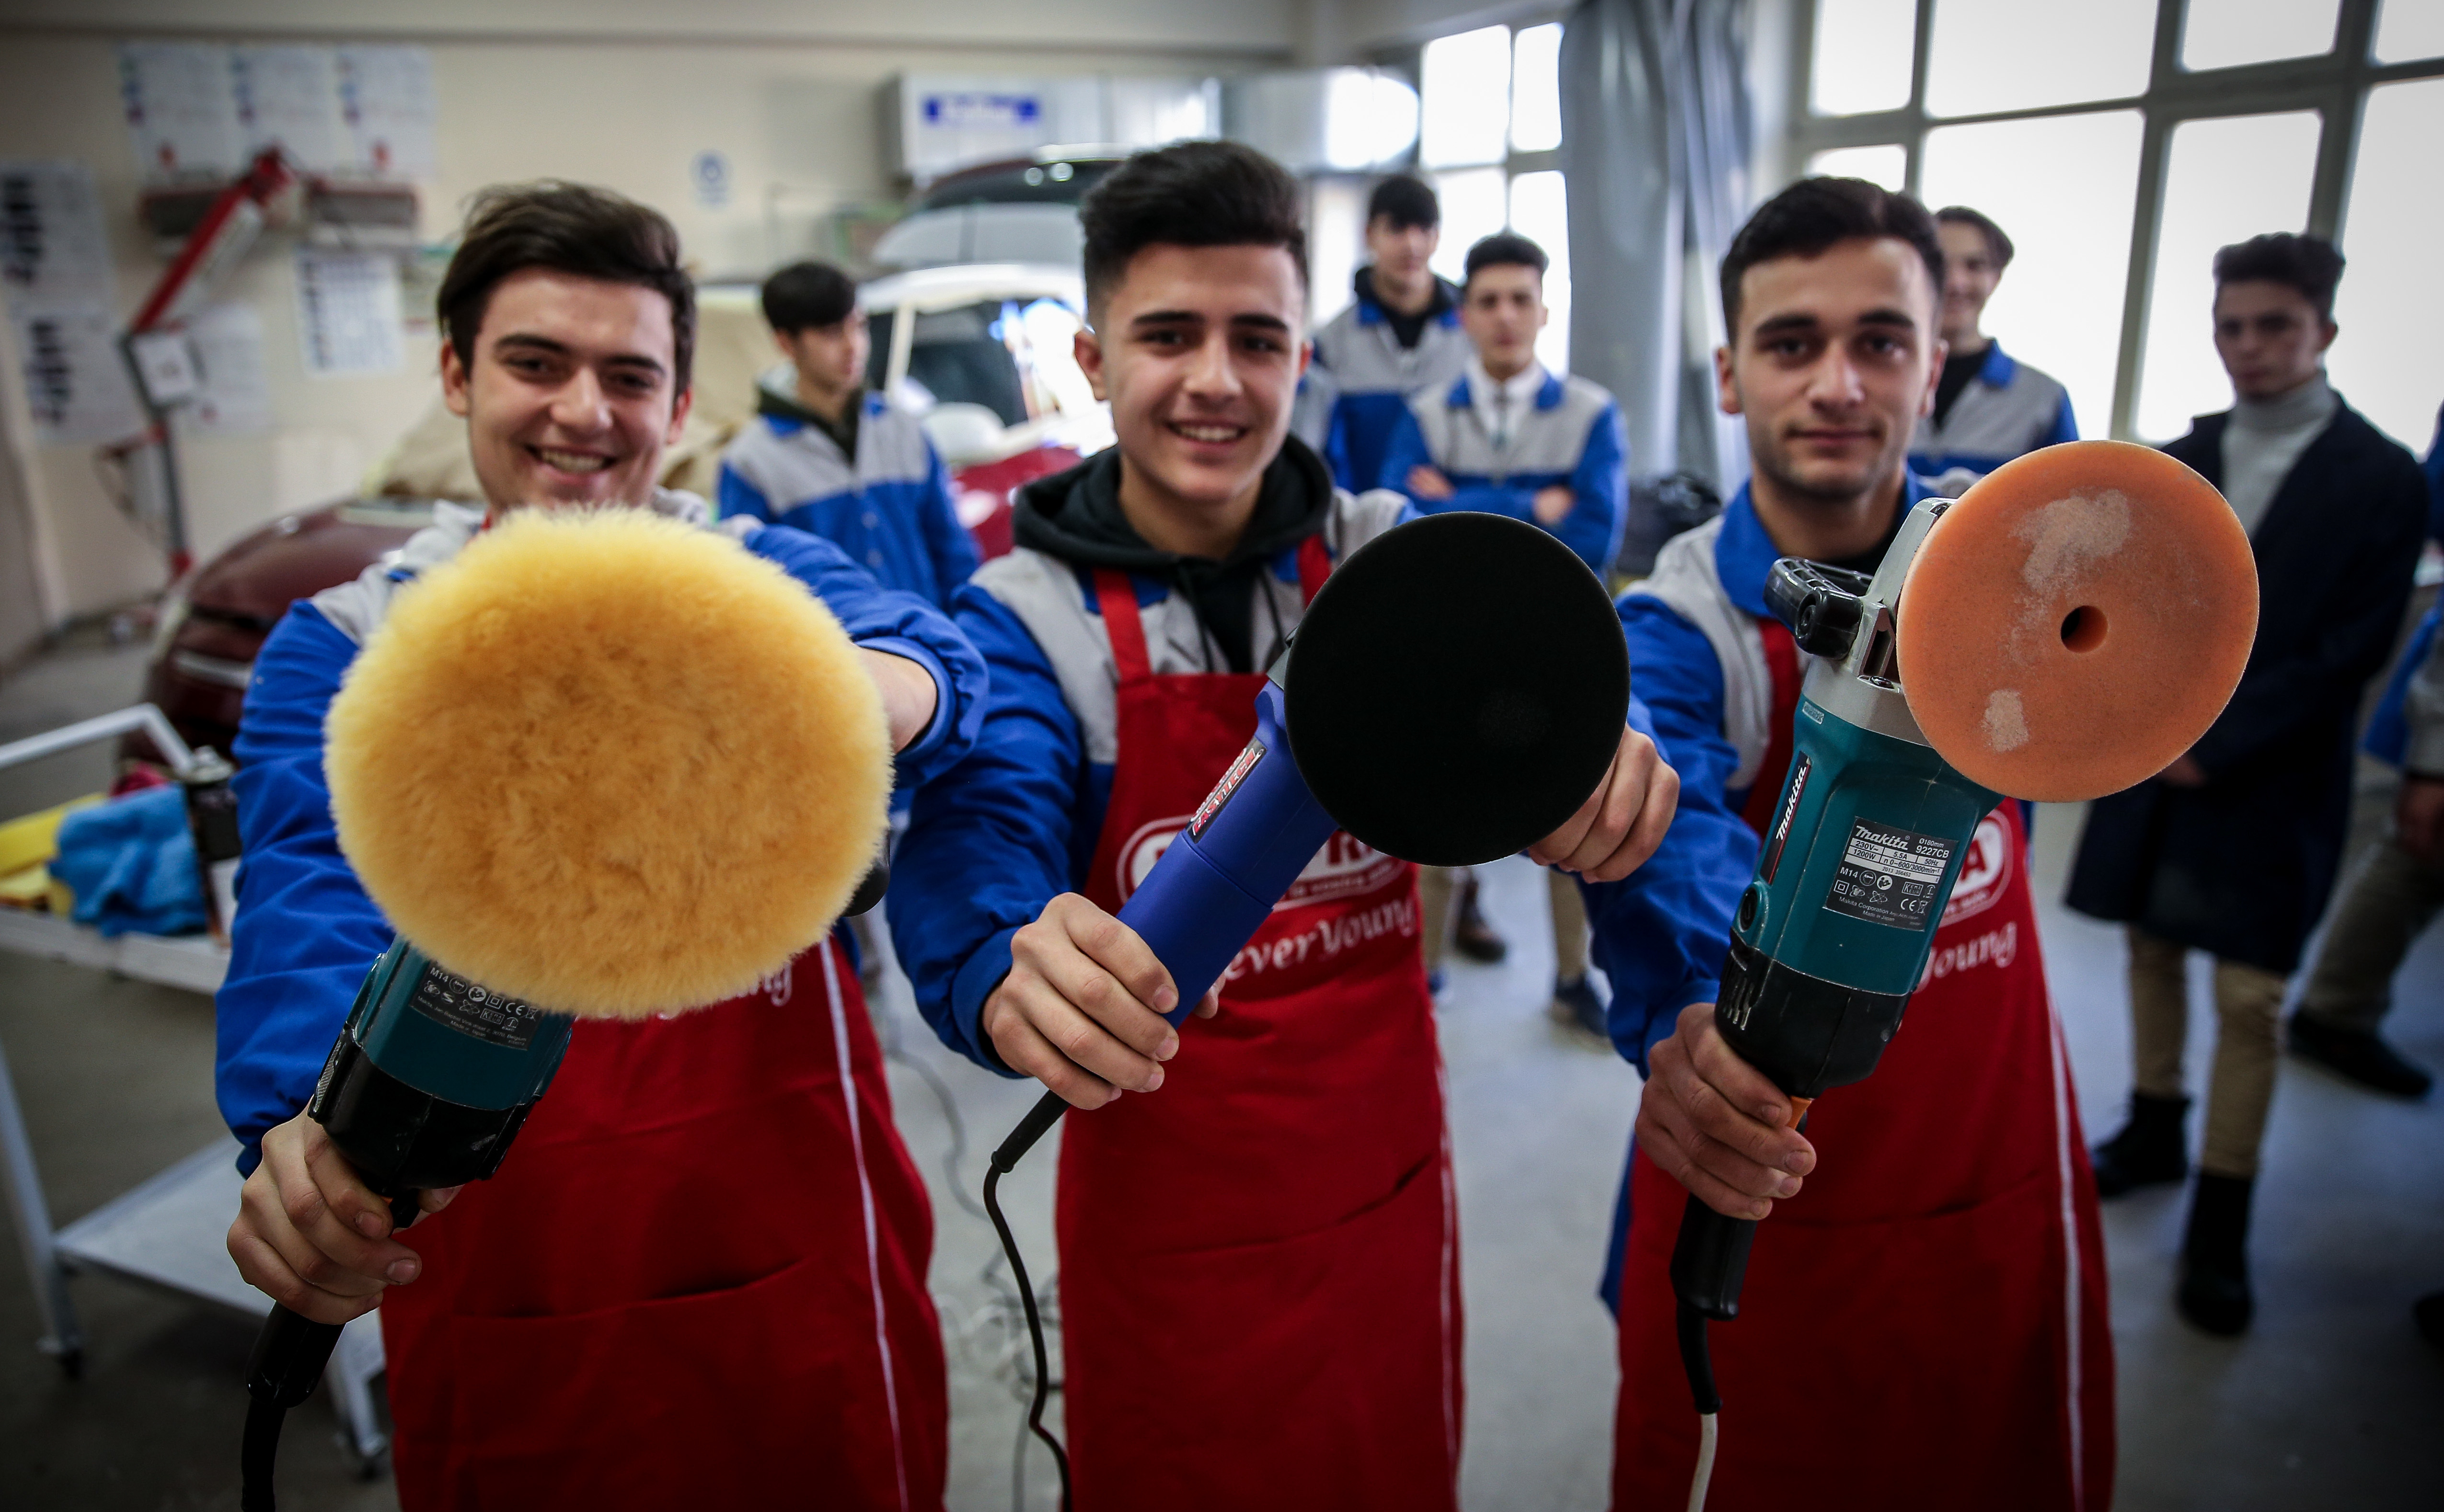 Turkish school produces car paint, can’t keep up with demand after support from Italian giant